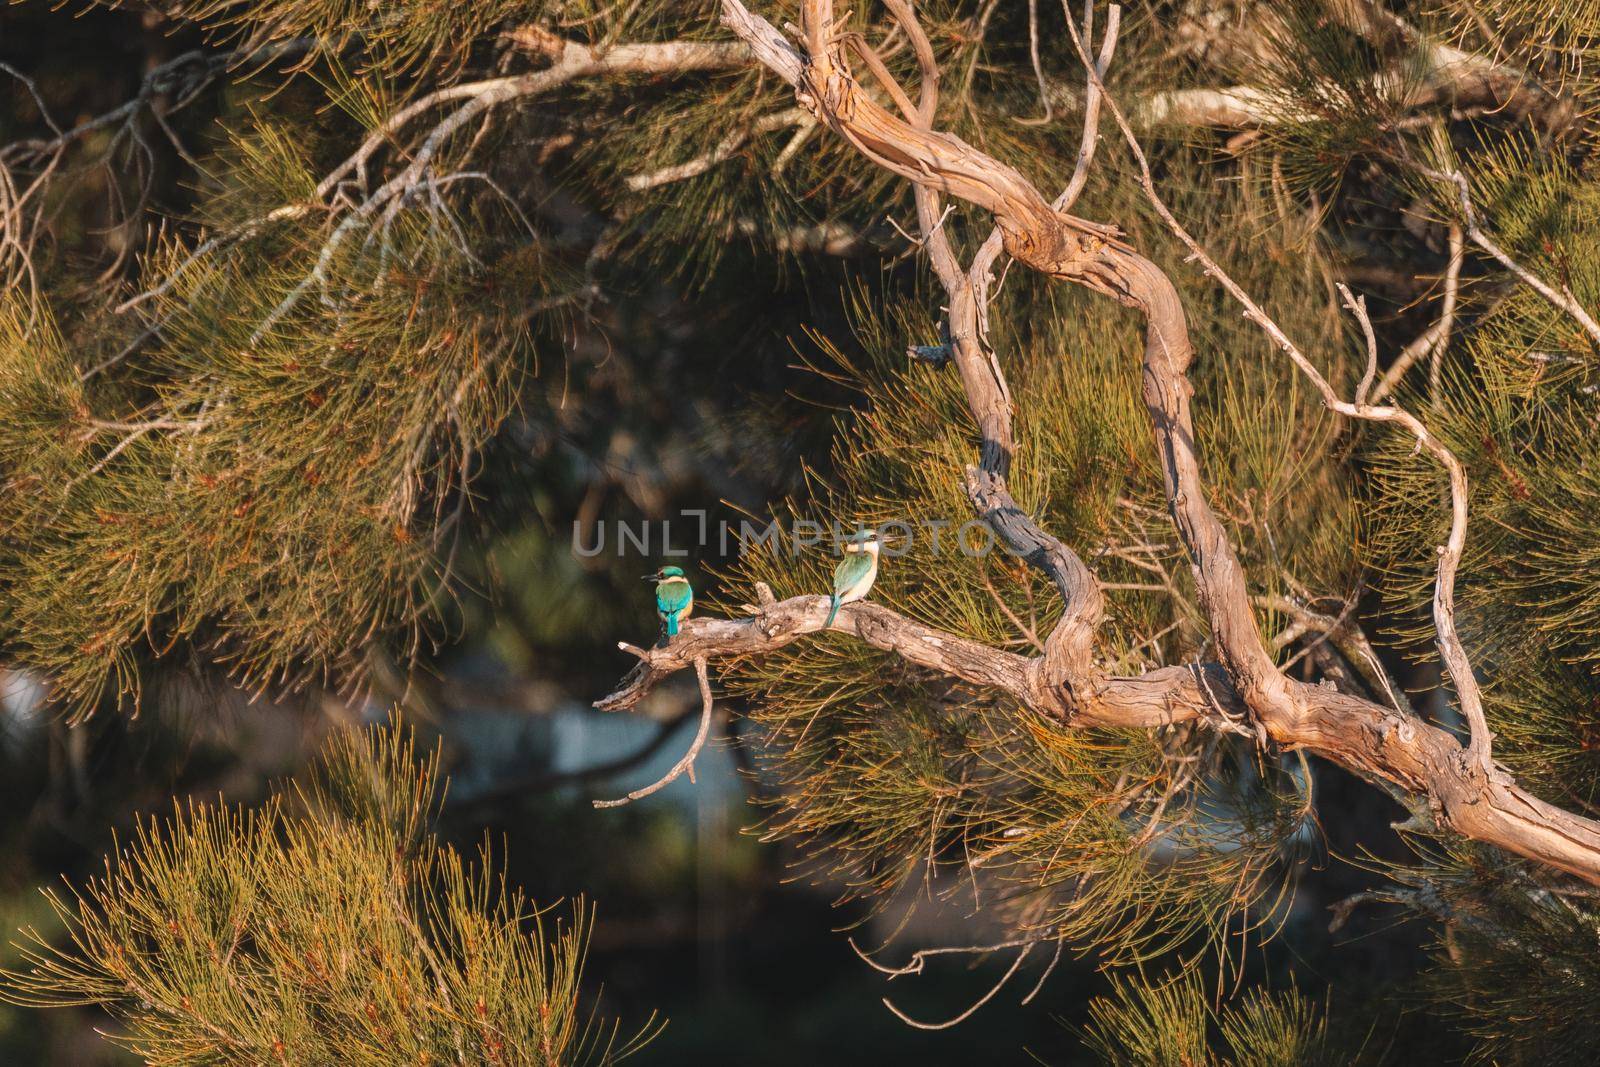 Two Sacred Kingfisher Perched in a Tree by braydenstanfordphoto